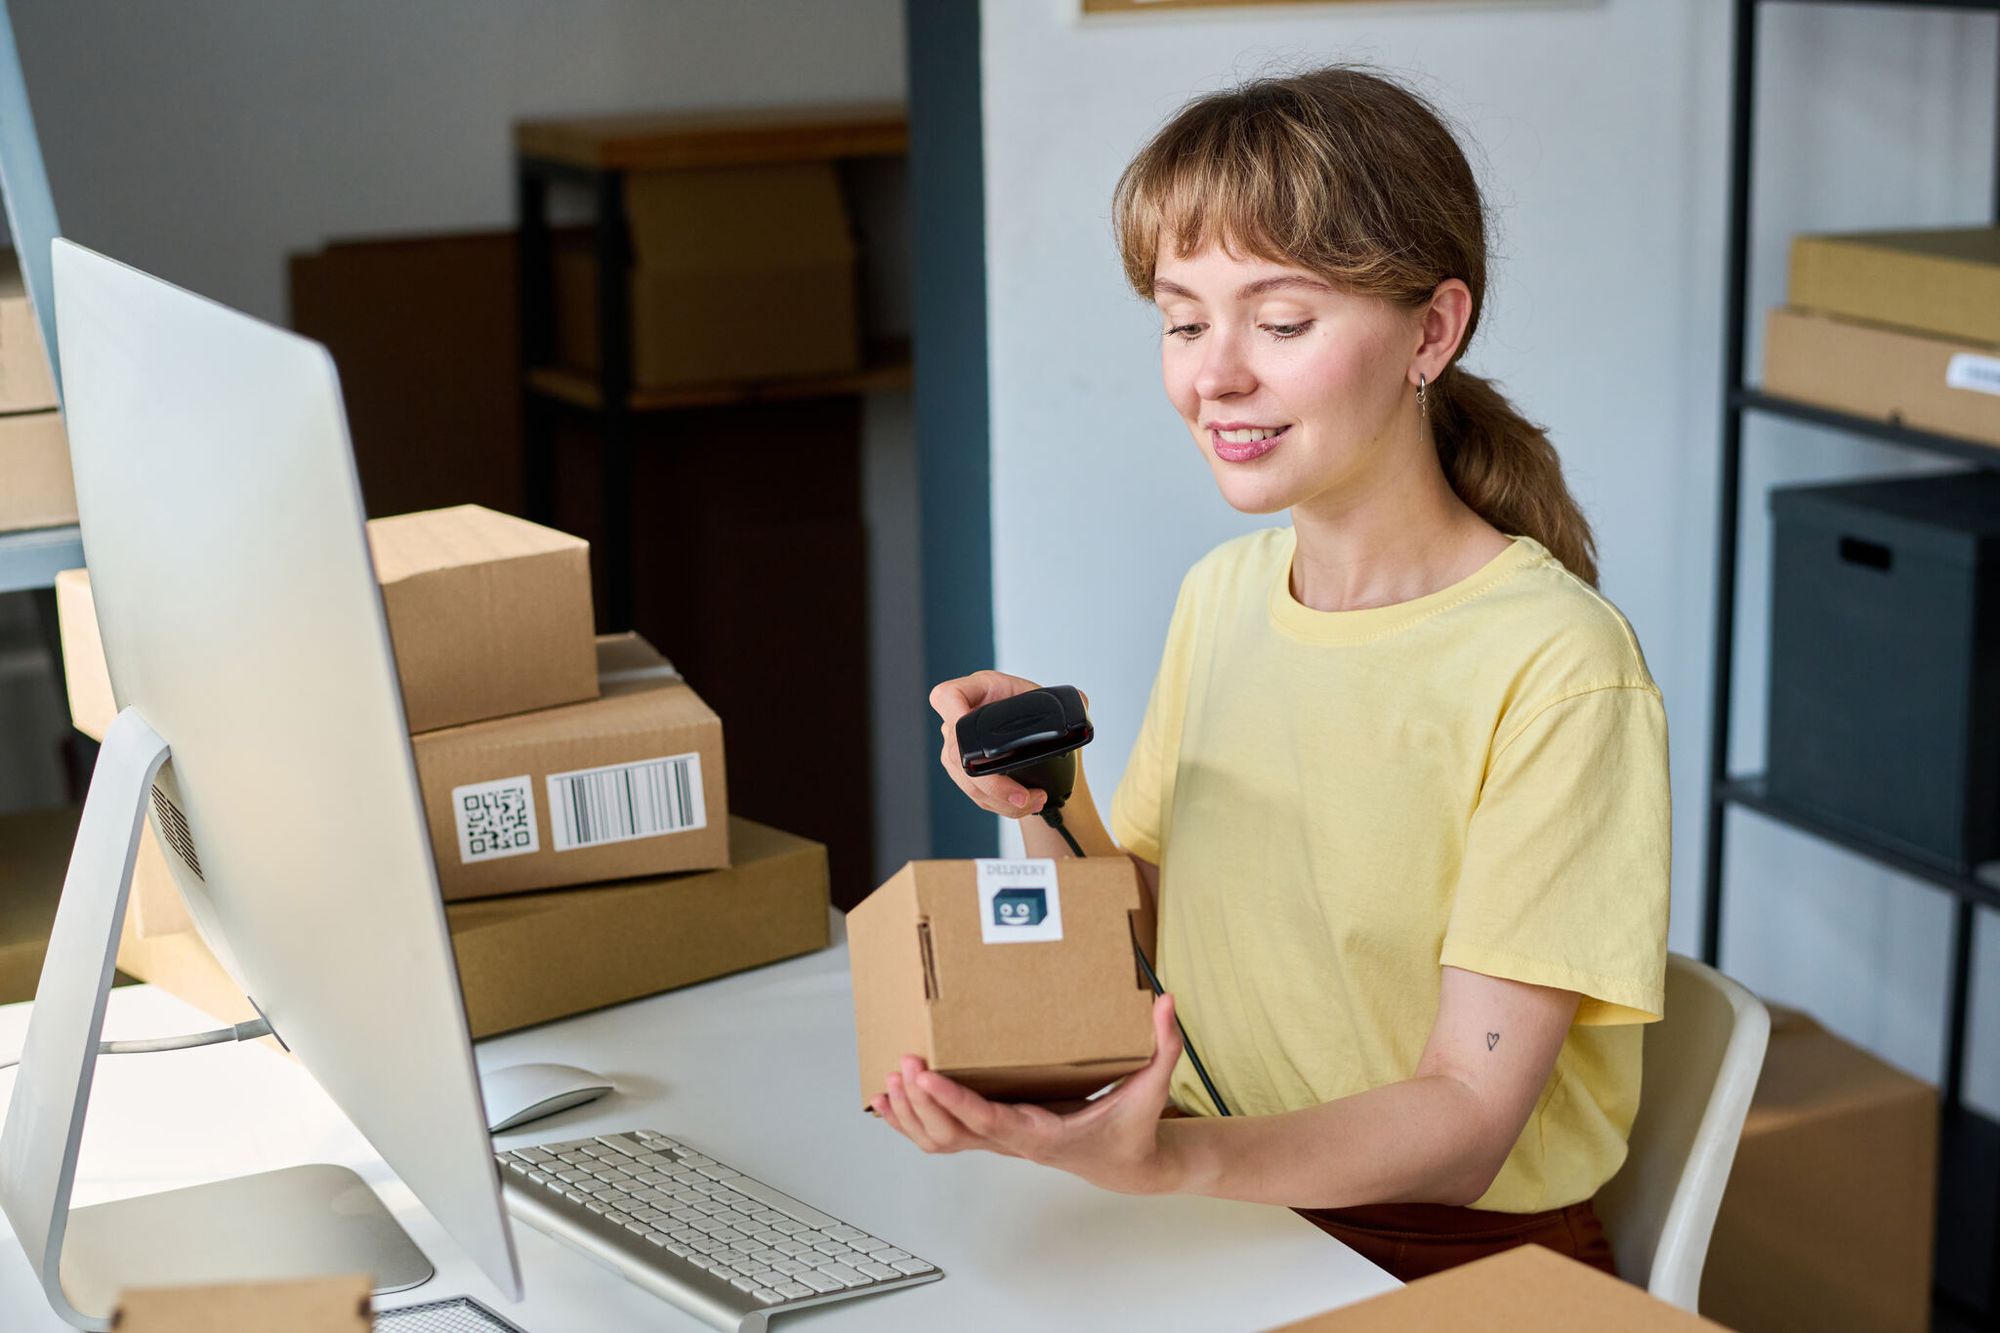 Young smiling woman scanning a packed box with a QR code